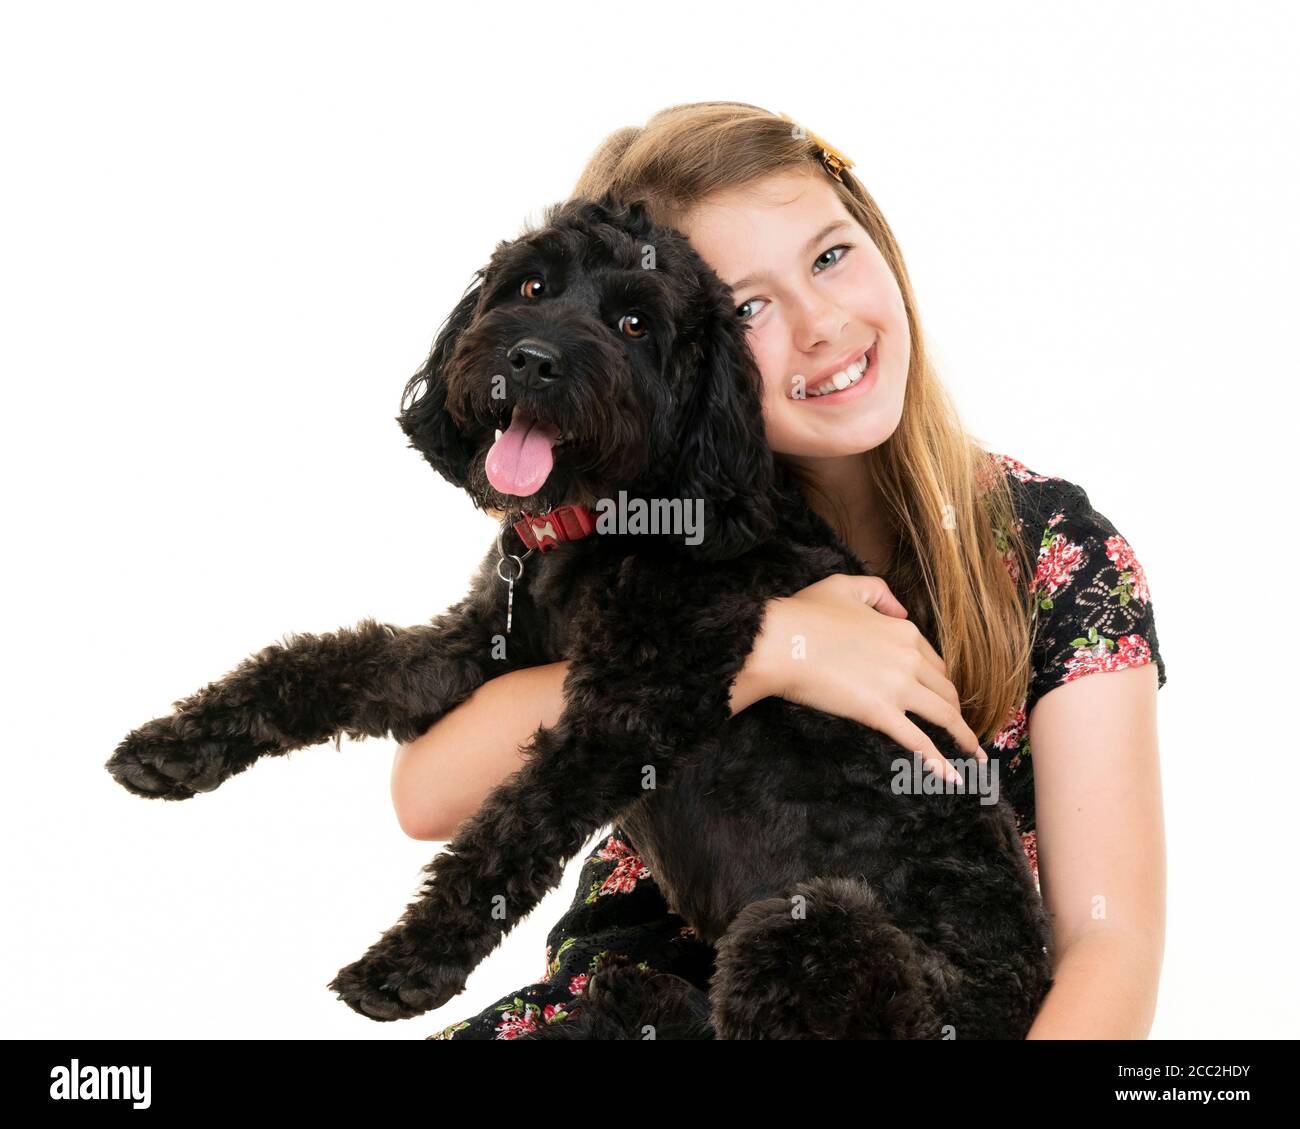 Horizontal portrait of a young girl with her pet dog on a white background in a studio or high key. Stock Photo